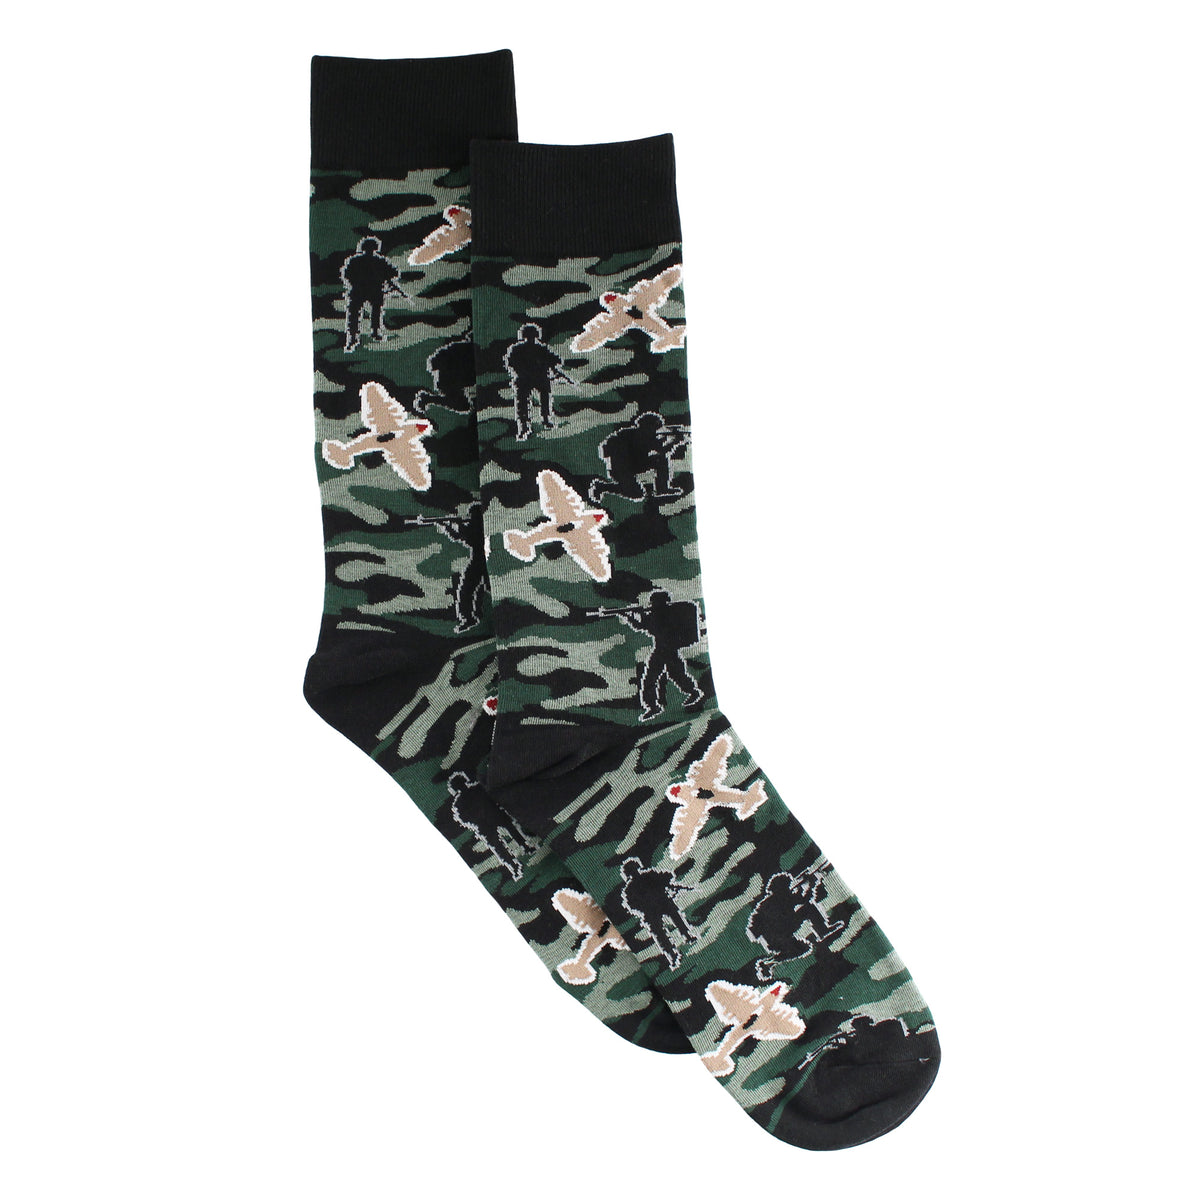 Army Socks - 4 FOR 3